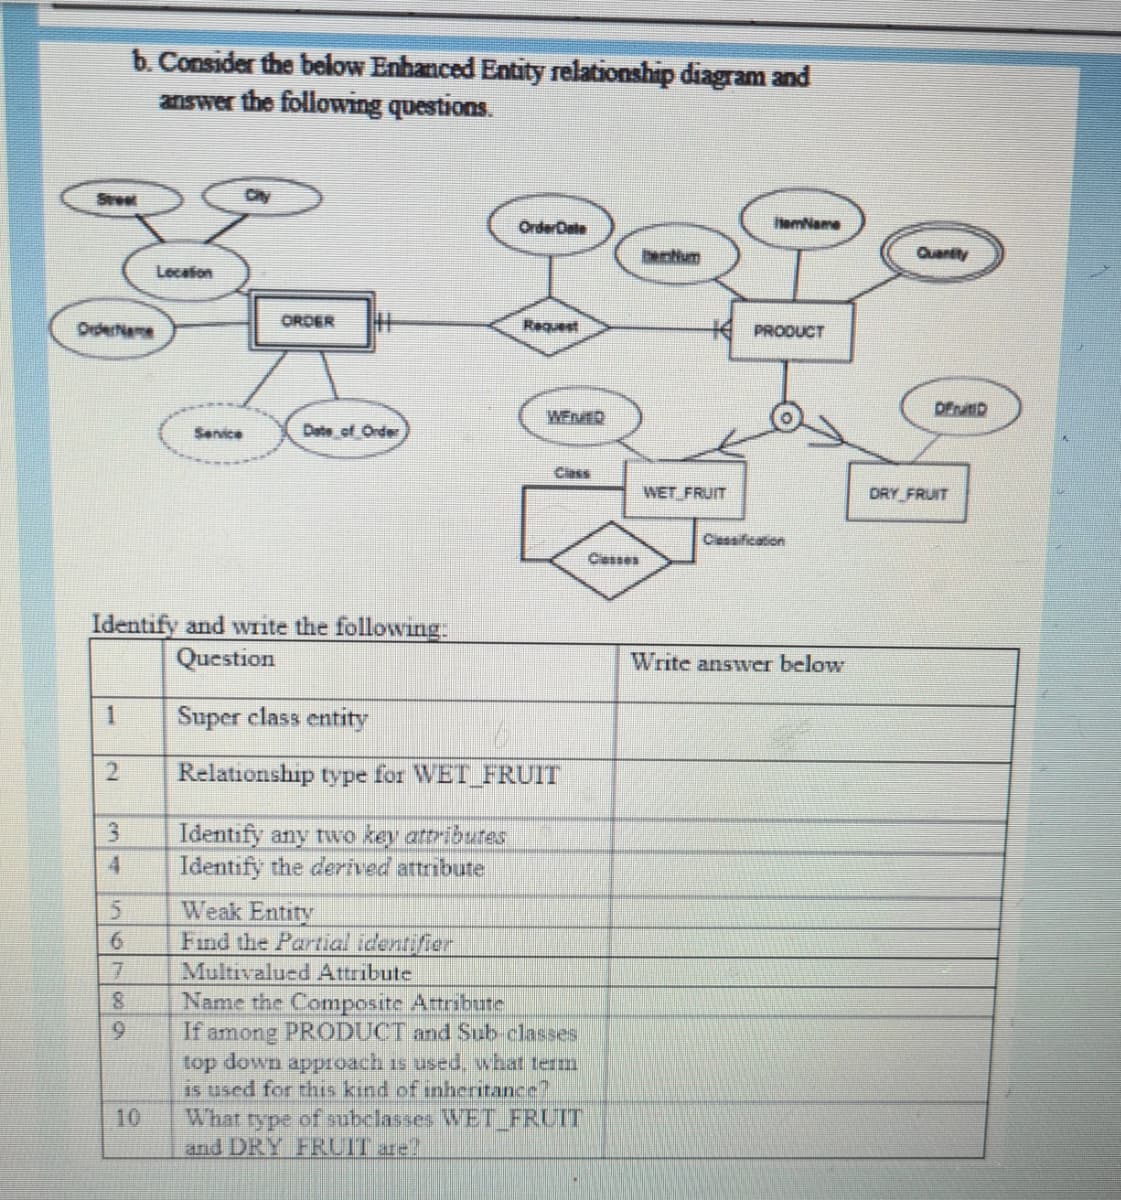 b. Consider the below Enhanced Entity relationship diagram and
answer the following questions.
Steet
City
OrderDate
HemName
Dantum
Quantity
Lecefon
ORDER
Ordeieme
Request
PRODUCT
DfrutiD
WEnED
Senice
Date of Order
Class
WET FRUIT
DRY FRUIT
Ciessification
Classes
Identify and write the following.
Question
Write answver below
Super class entity
Relationship type for WET FRUIT
3.
4.
Identify any two key atribures
Identify the derived attribute
Weak Entity
Find the Partial identifier
Multivalued Attribute
Name the Composite Atribute
If
6.
among PRODUCT and Sub classes
top down approach is used, what term
is used for this kind of inheritance?
What type of subclasses WET_FRUIT
and DRY FRUIT are?
6.
10
789
